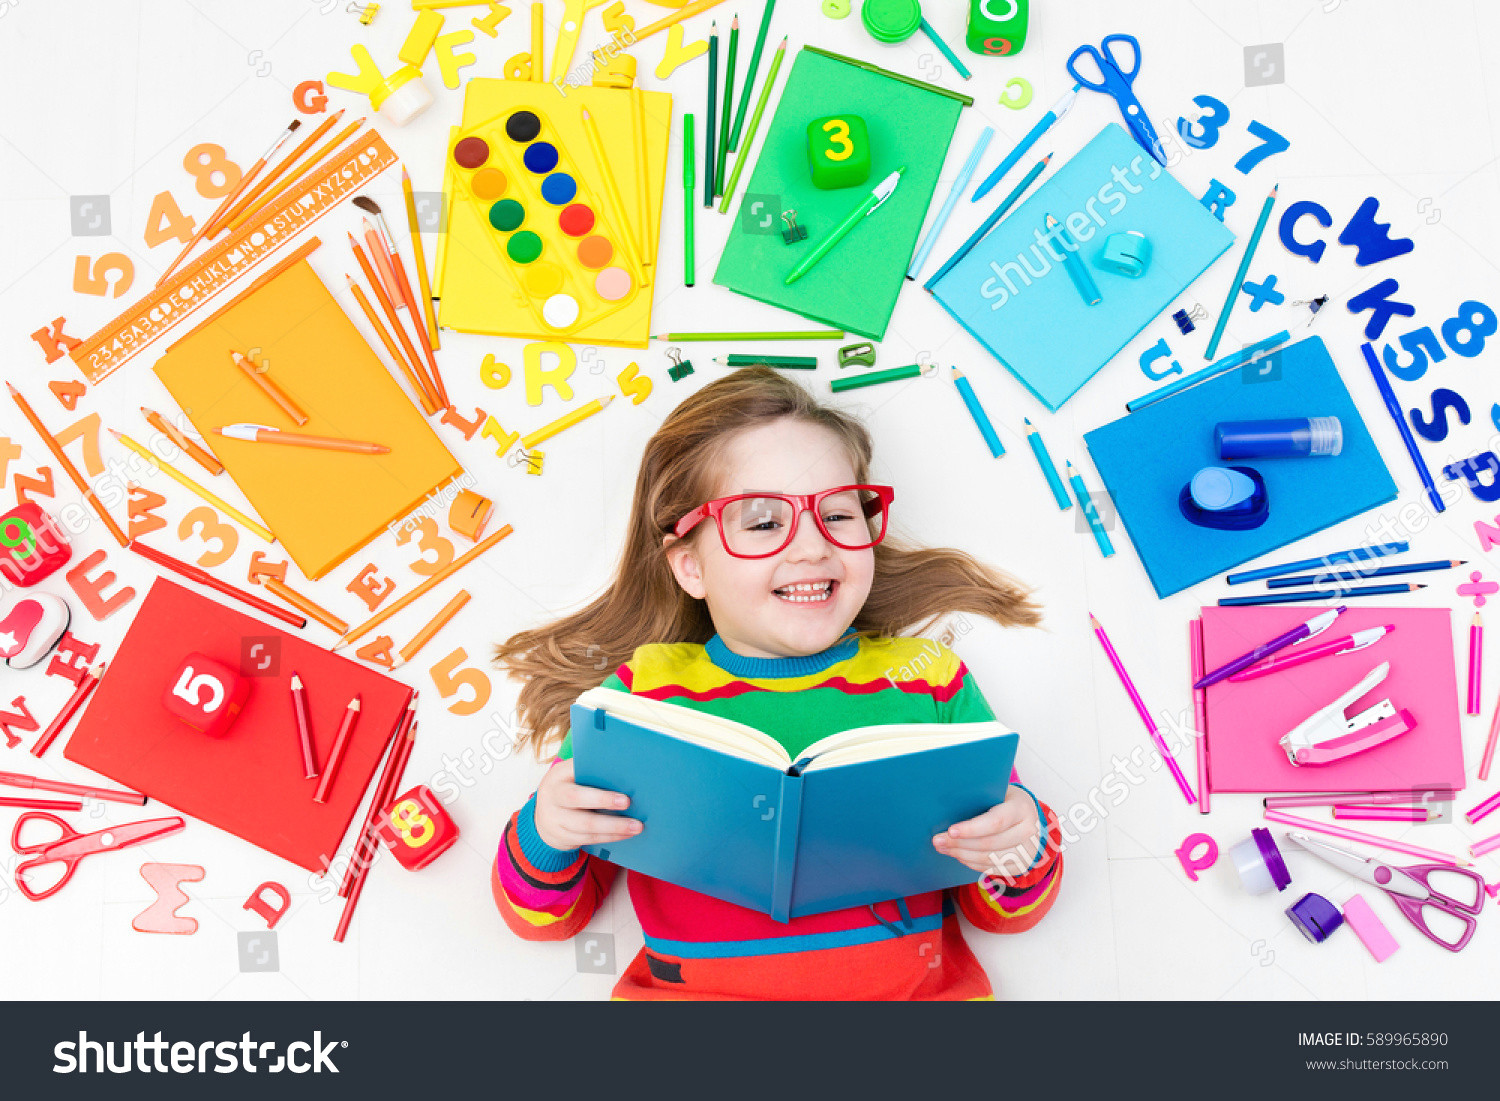 little girl with school supplies books drawing and painting tools and materials happy